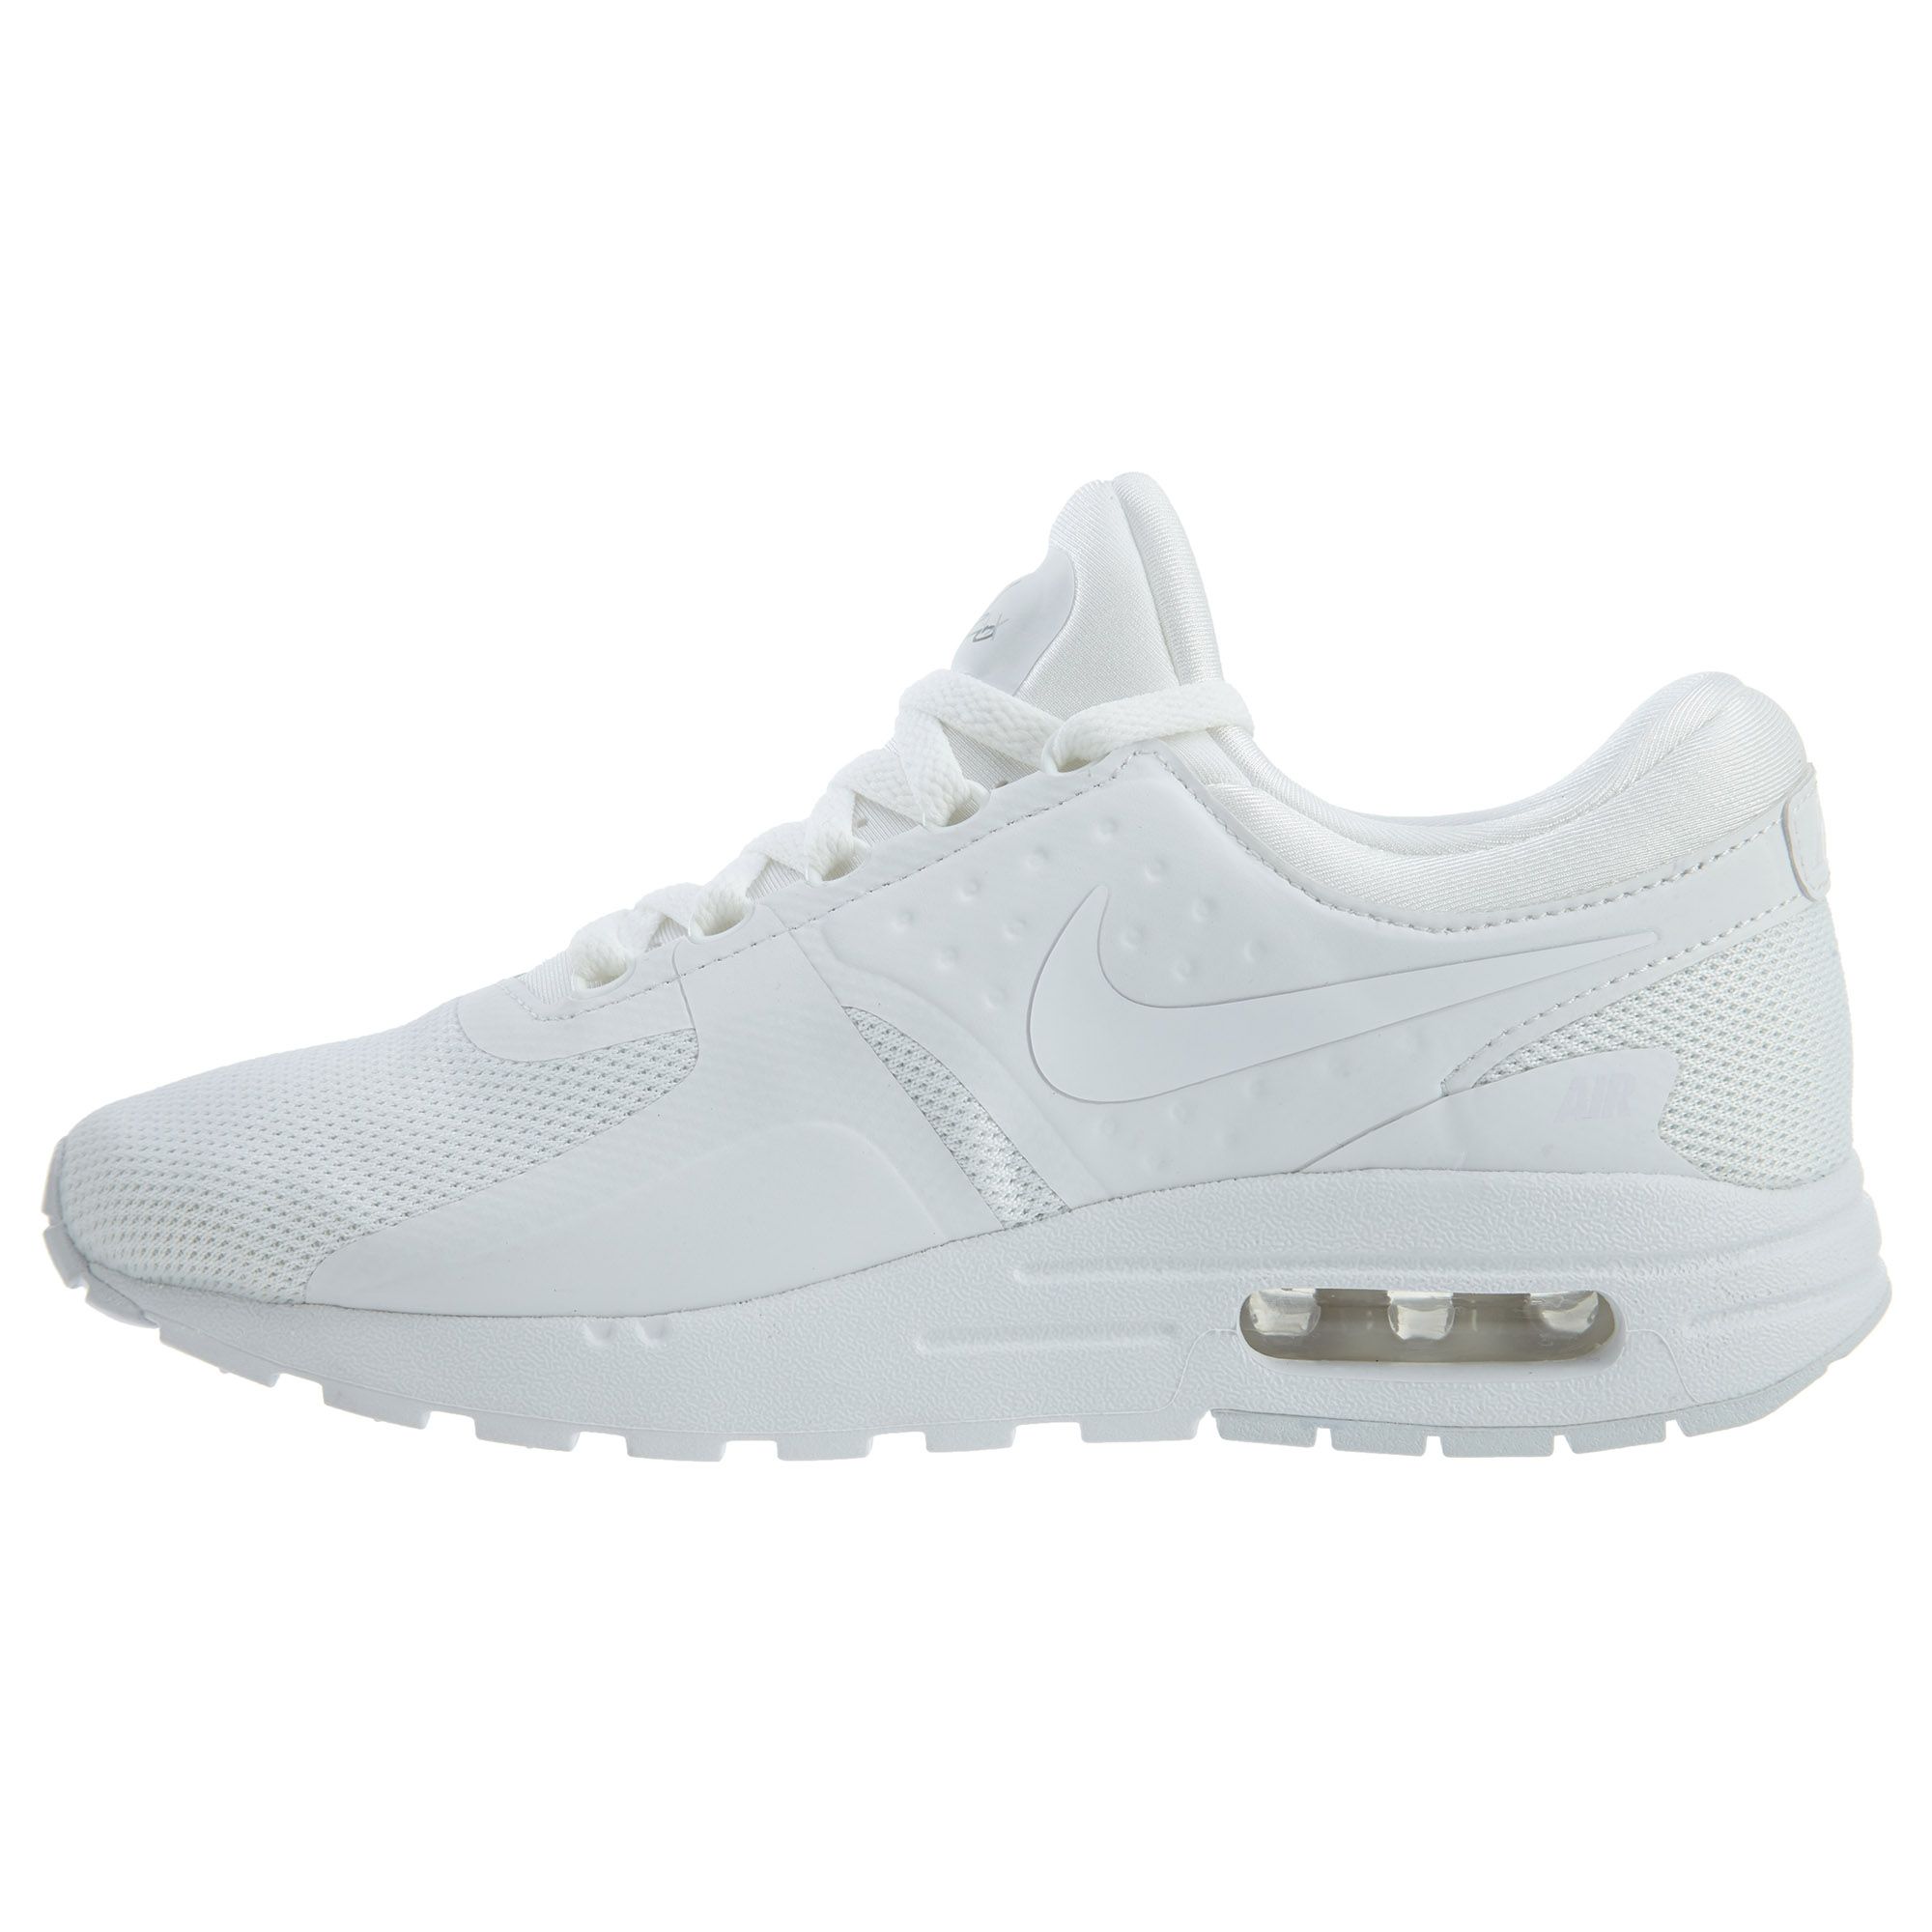 Air Max Zero Kids Online Hotsell, UP TO 